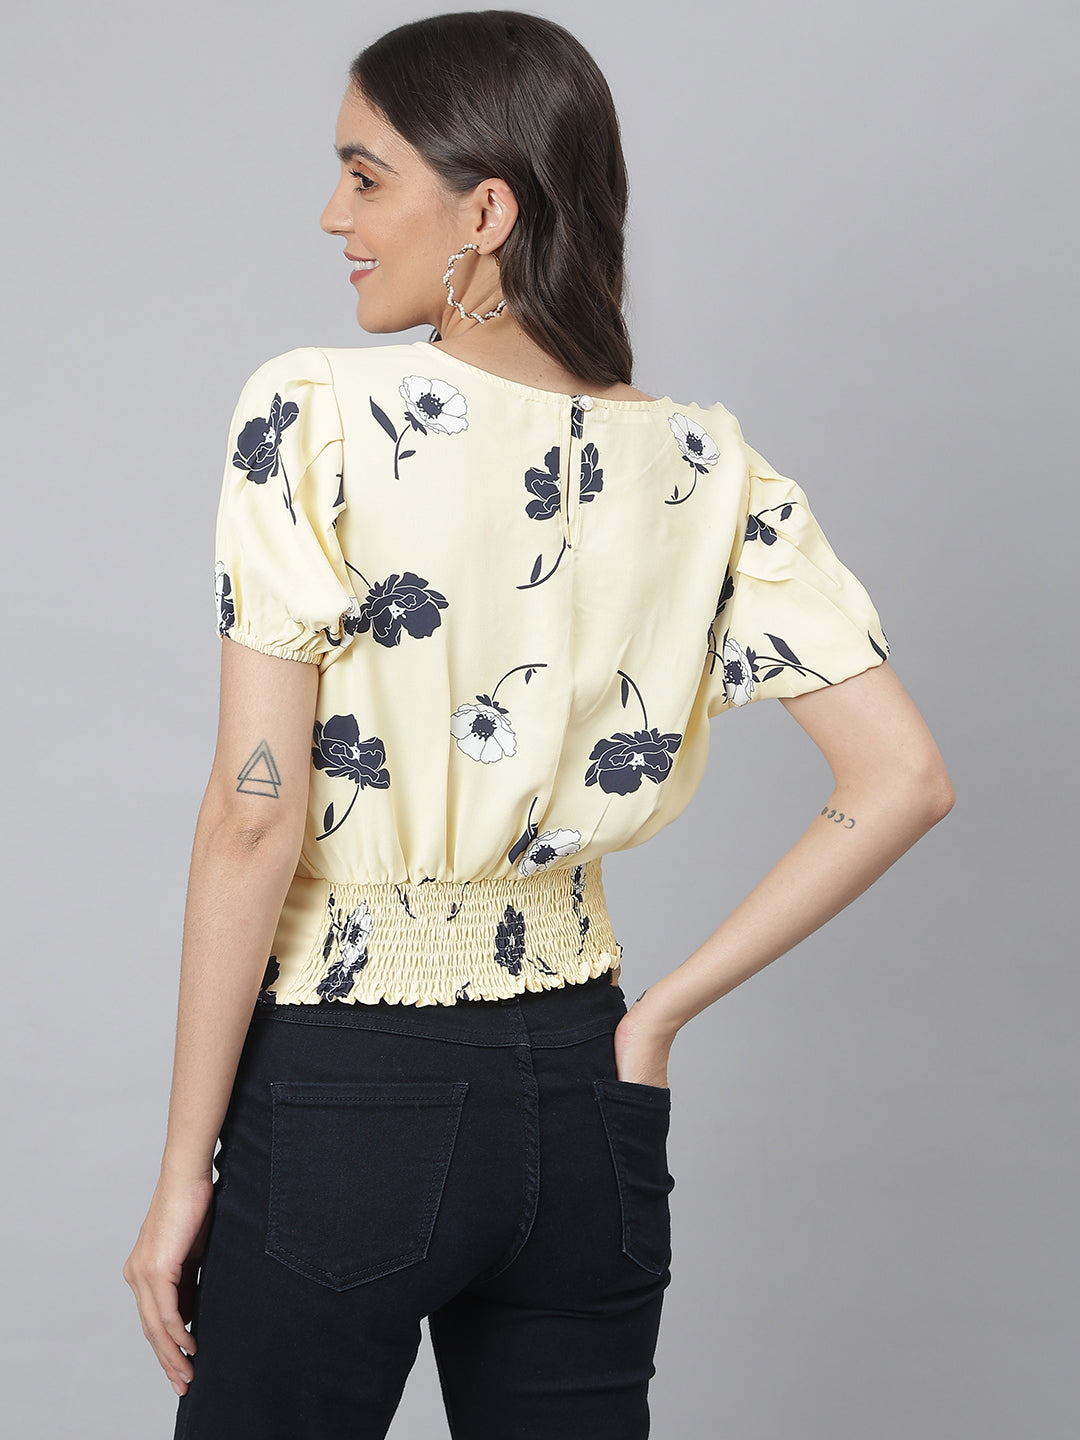 Lemon Floral Top With Elasticated Waist Band At Back For Perfect Fit